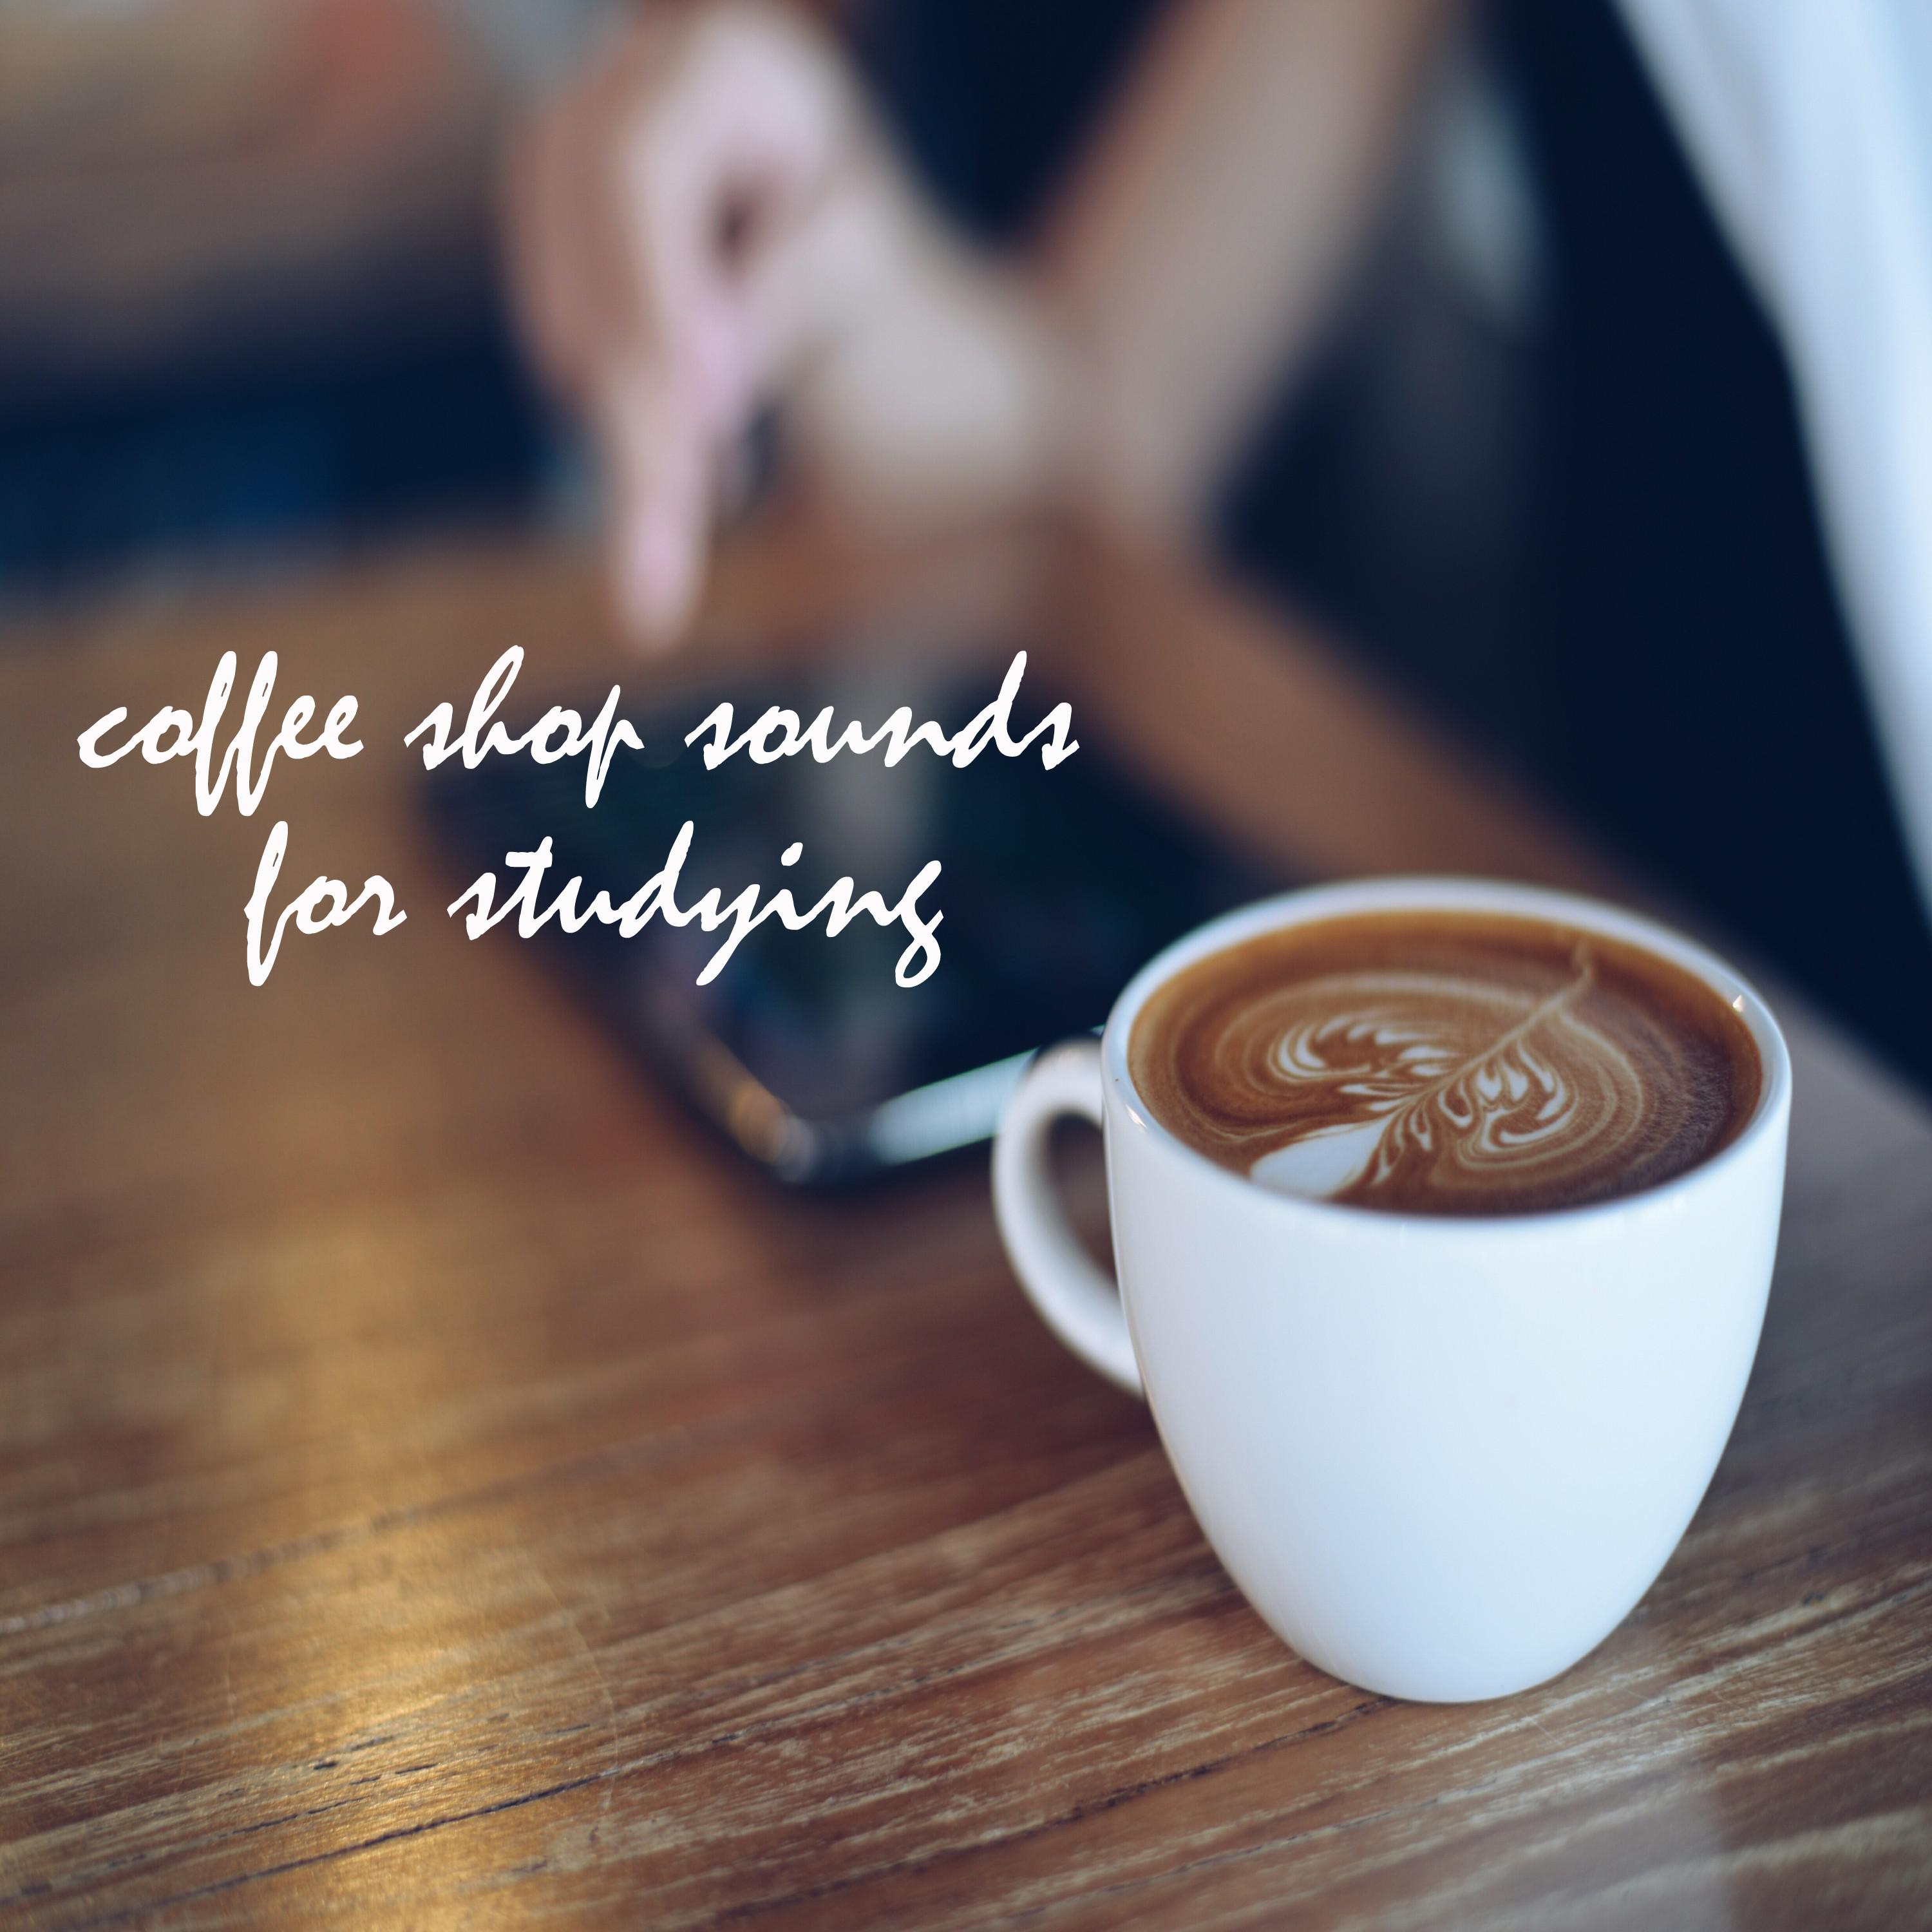 Coffee Shop Sounds for Studying and Working, Pt. 27